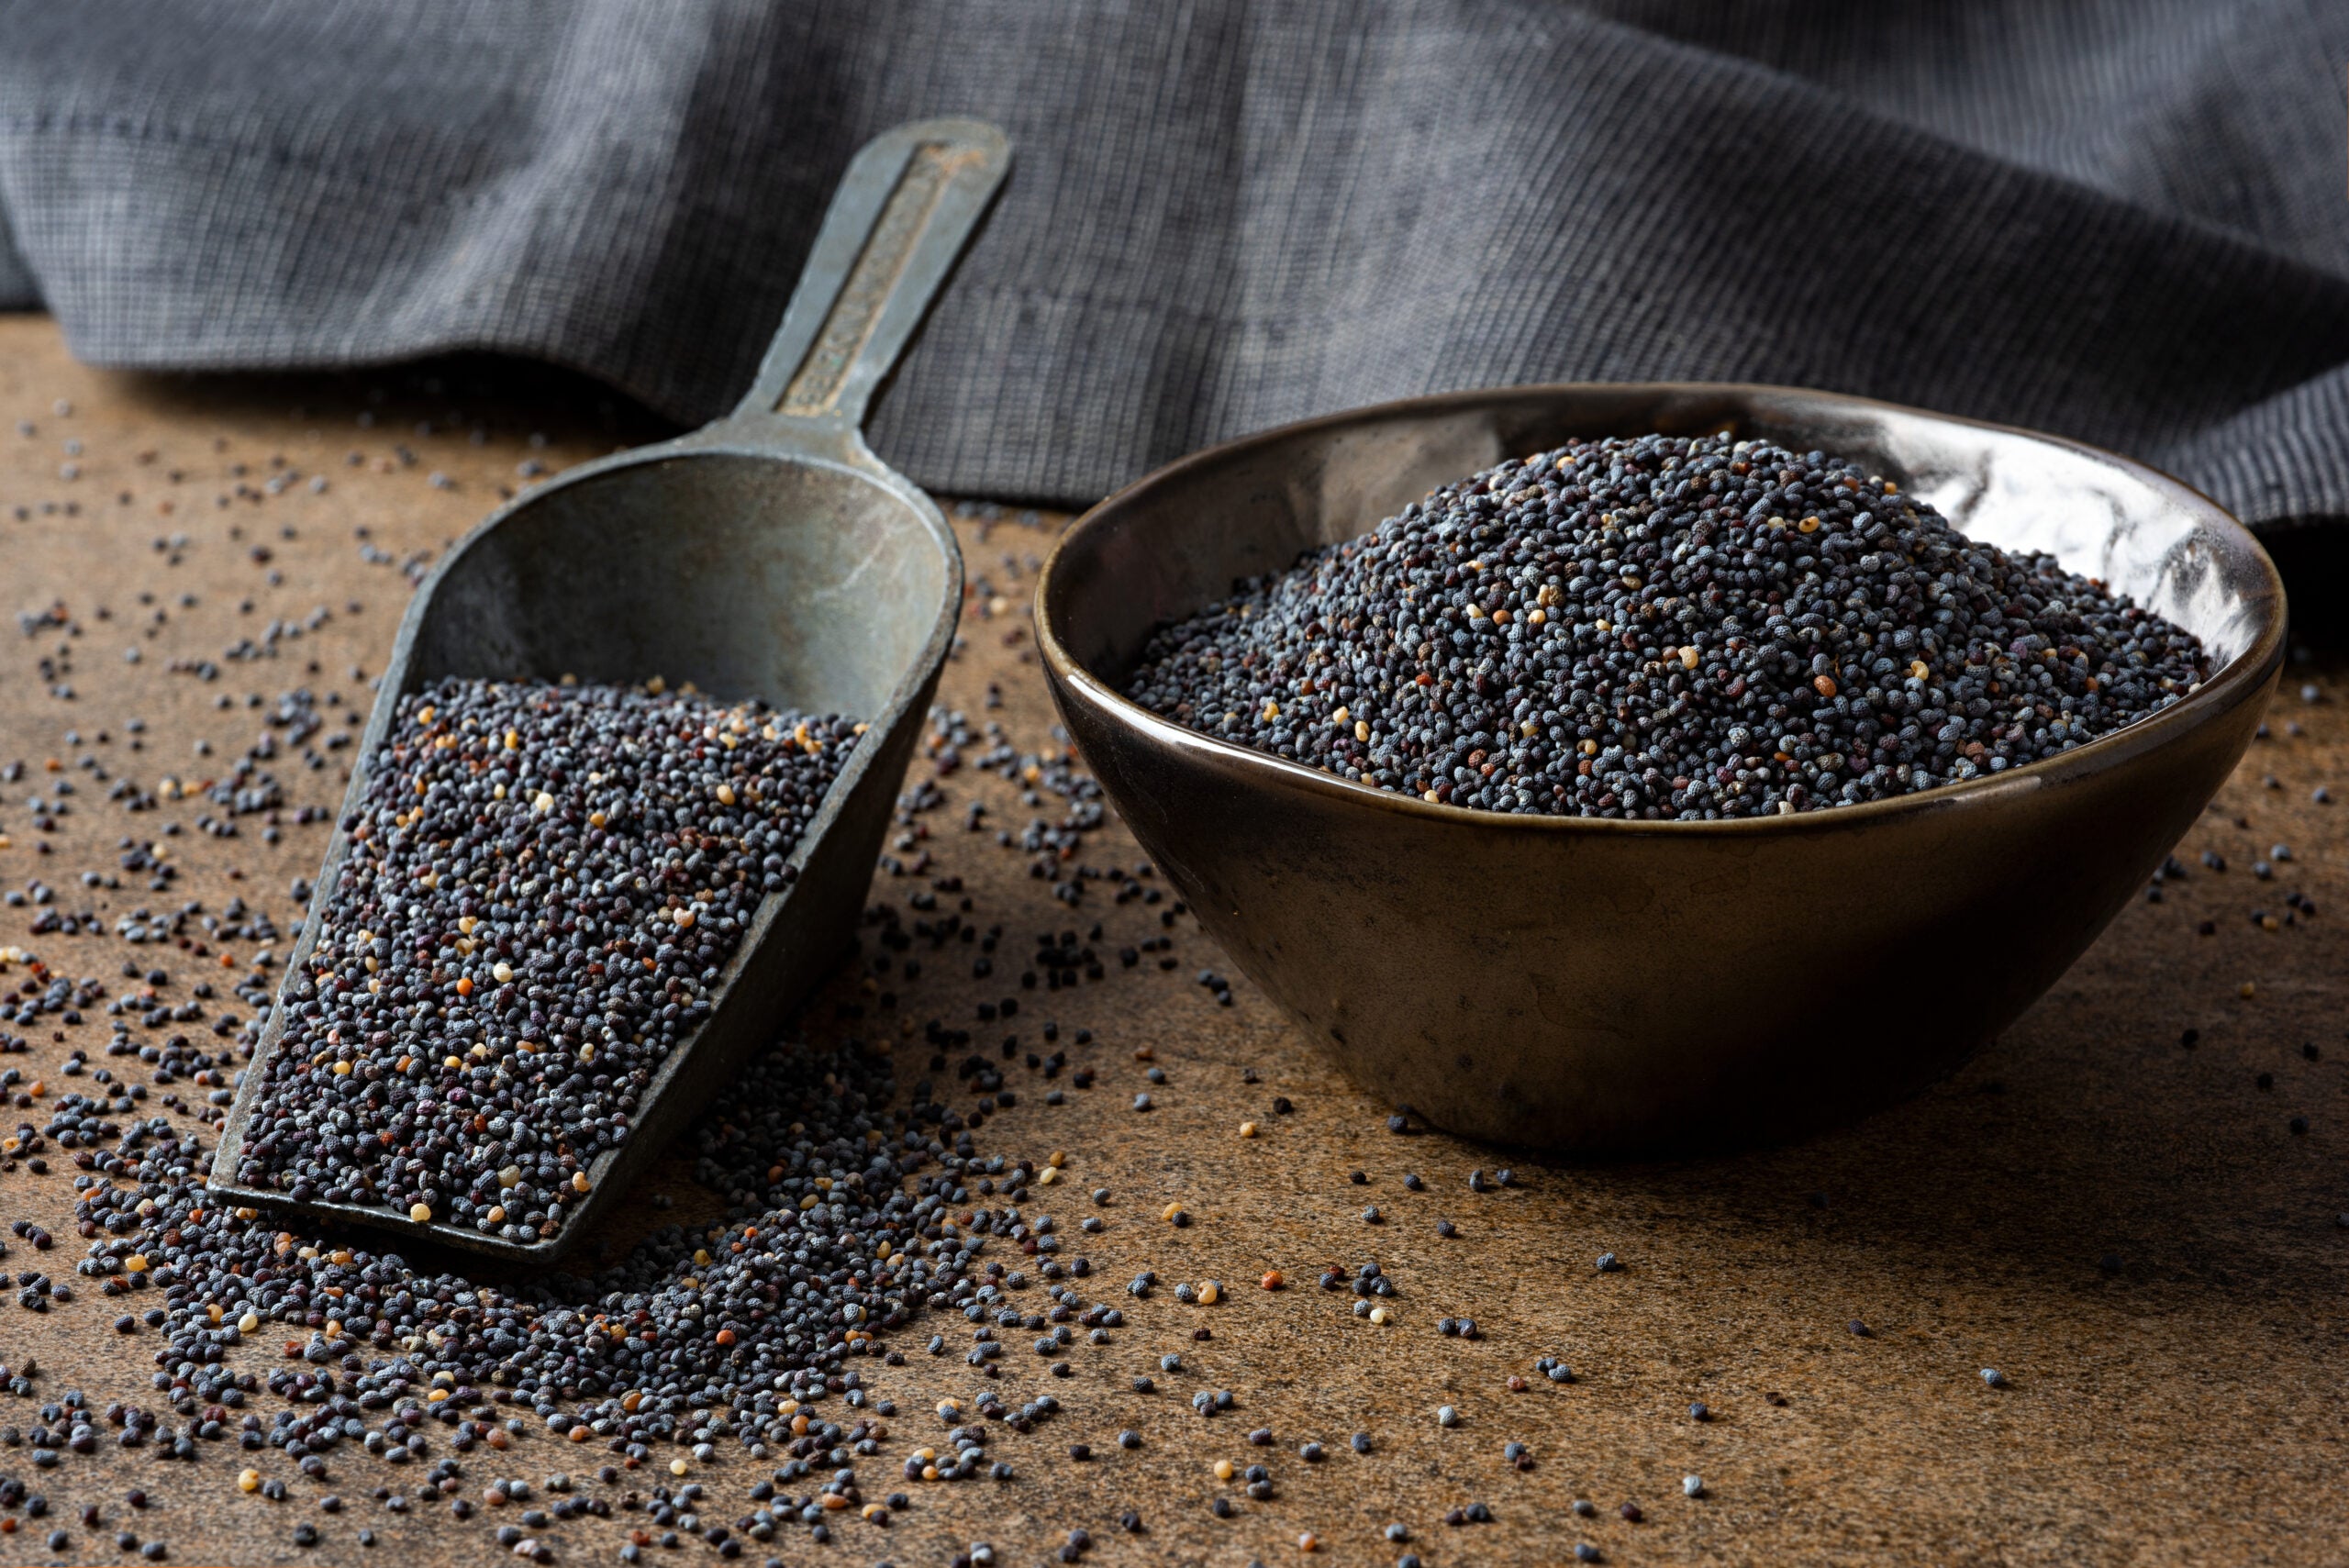 Poppy seeds can skew drug test results, but they won’t actually intoxicate you